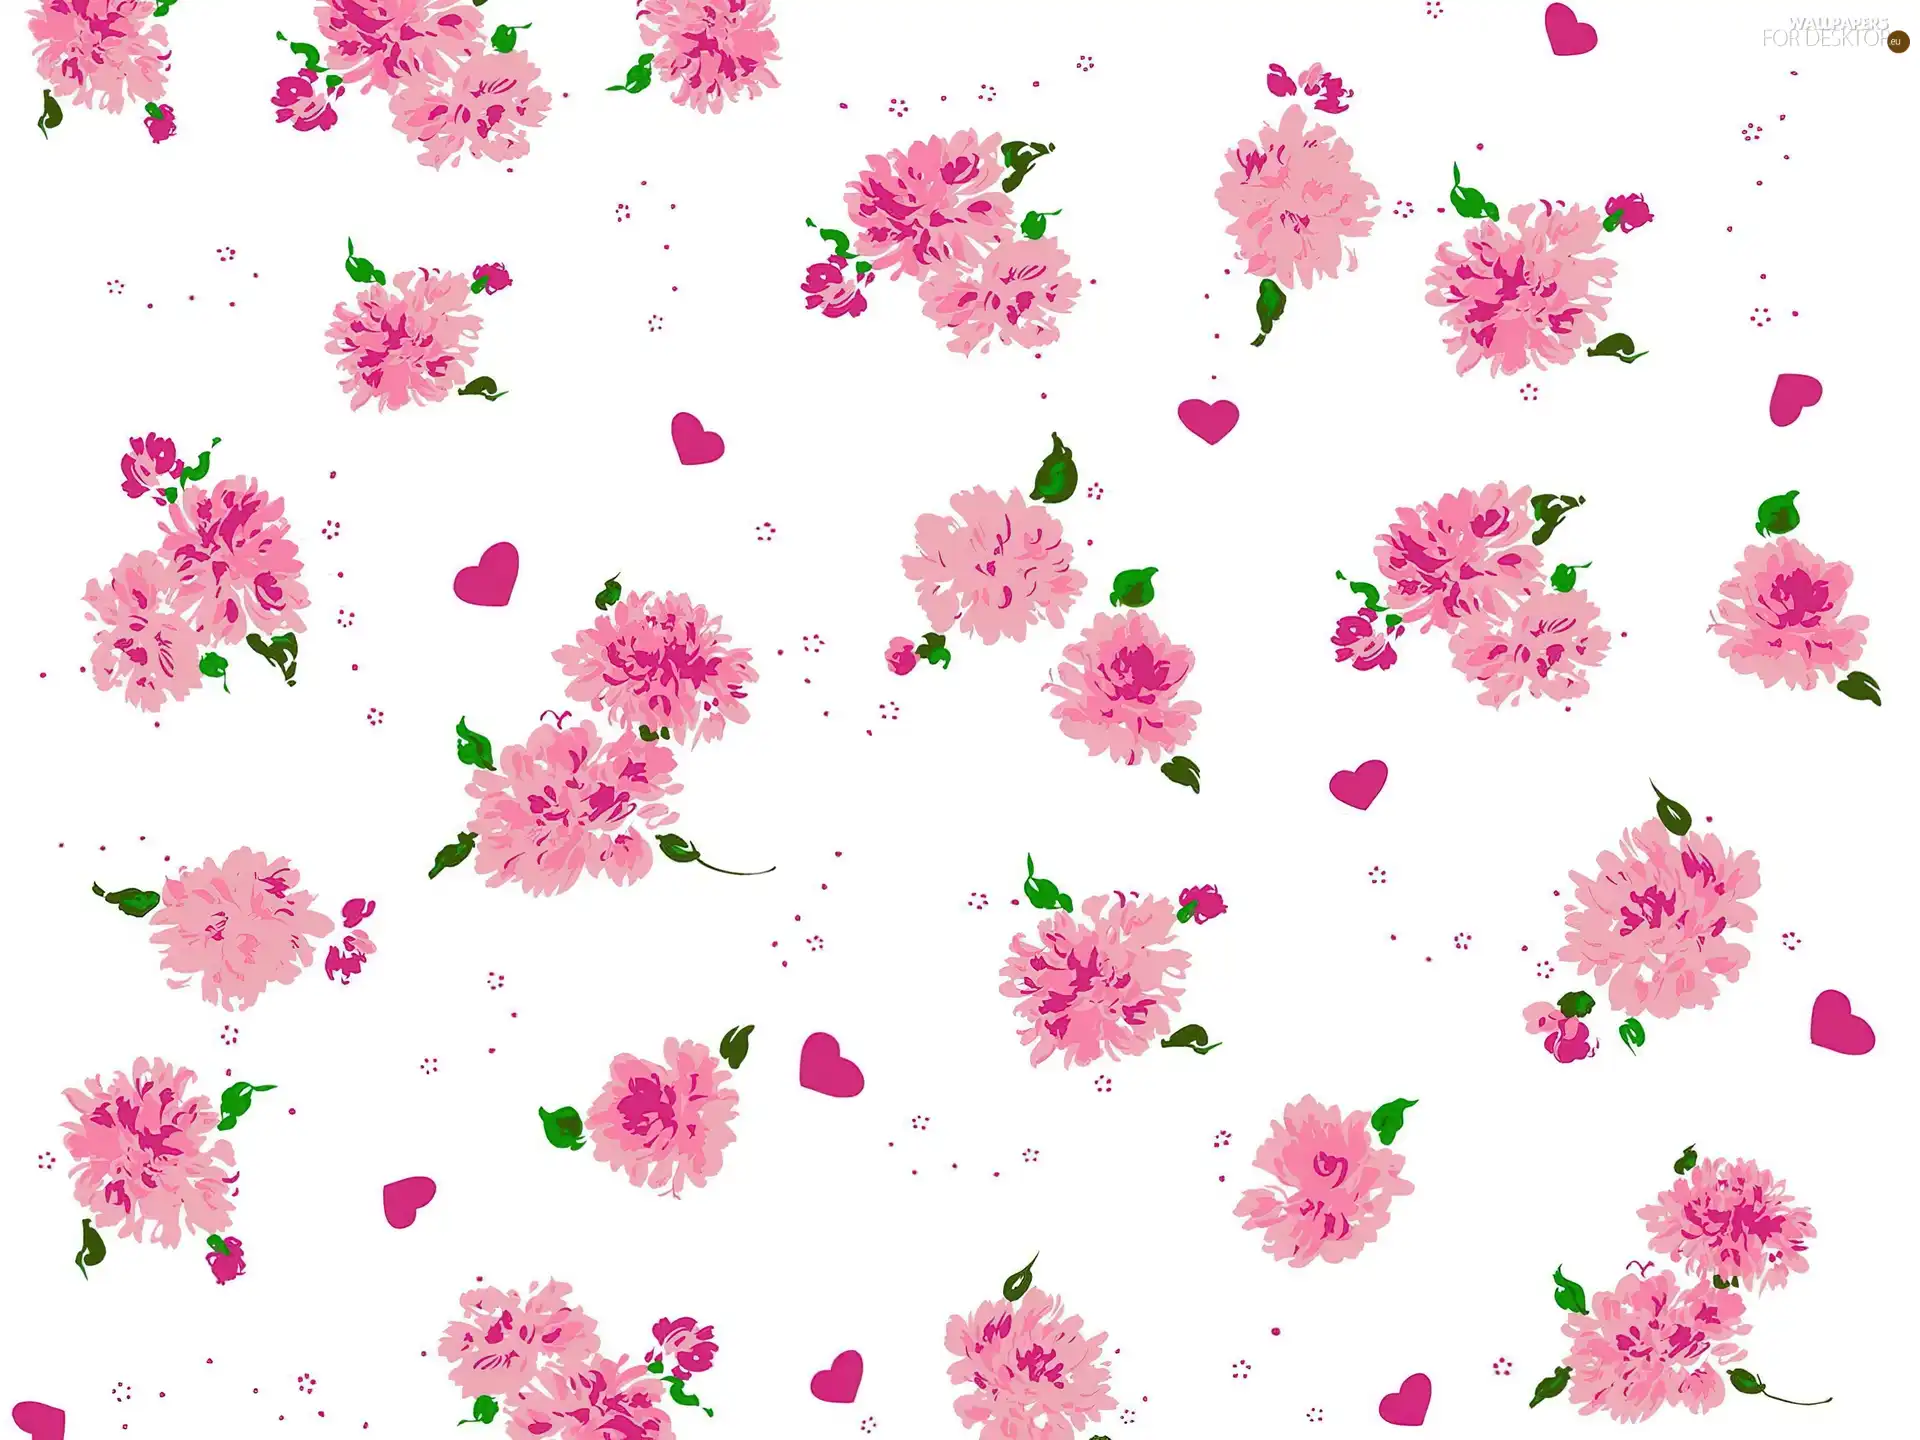 white, tle, Flowers, an, Pink